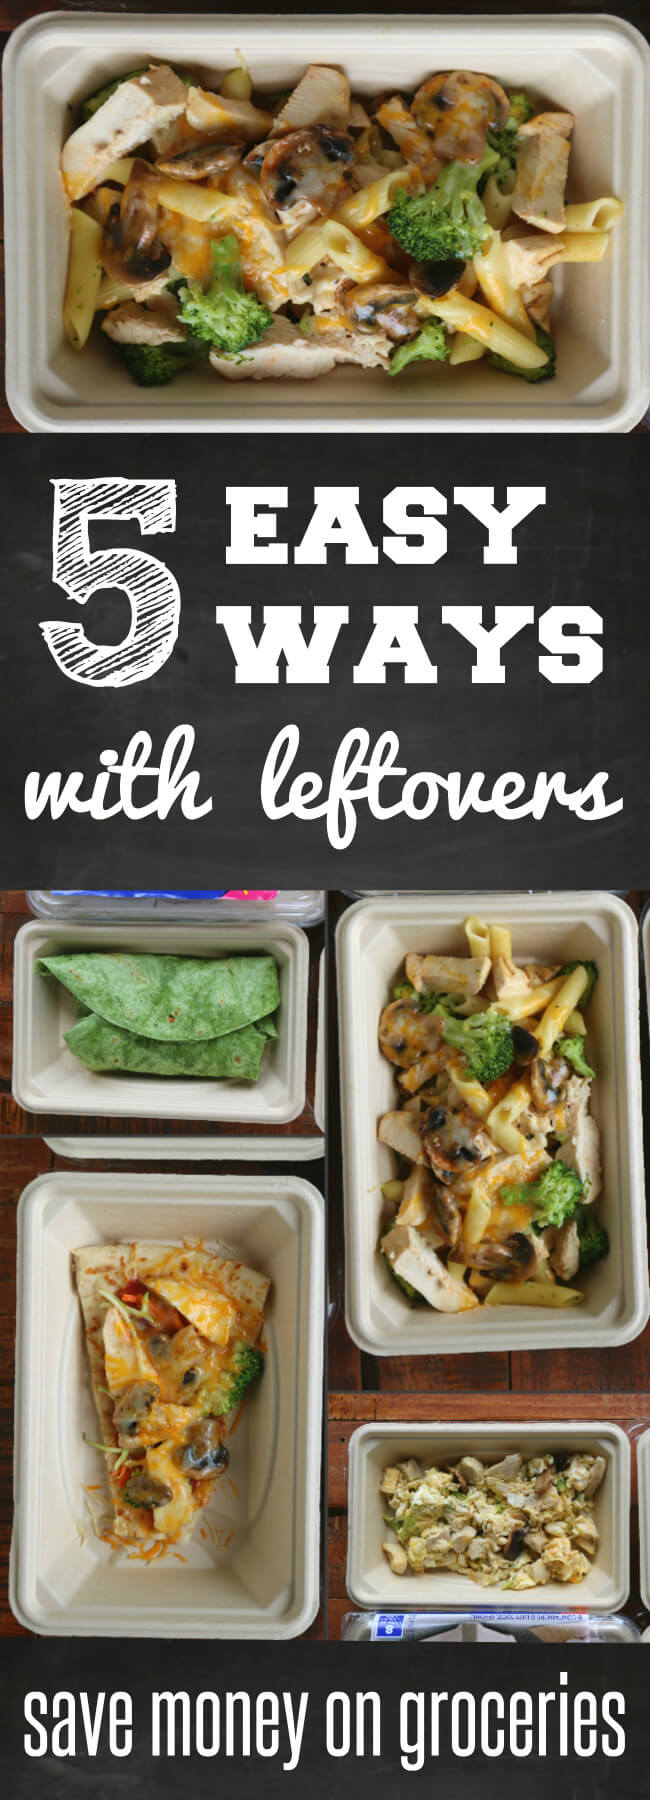 Save money on groveries with these tips for 5 Easy Ways with Leftovers